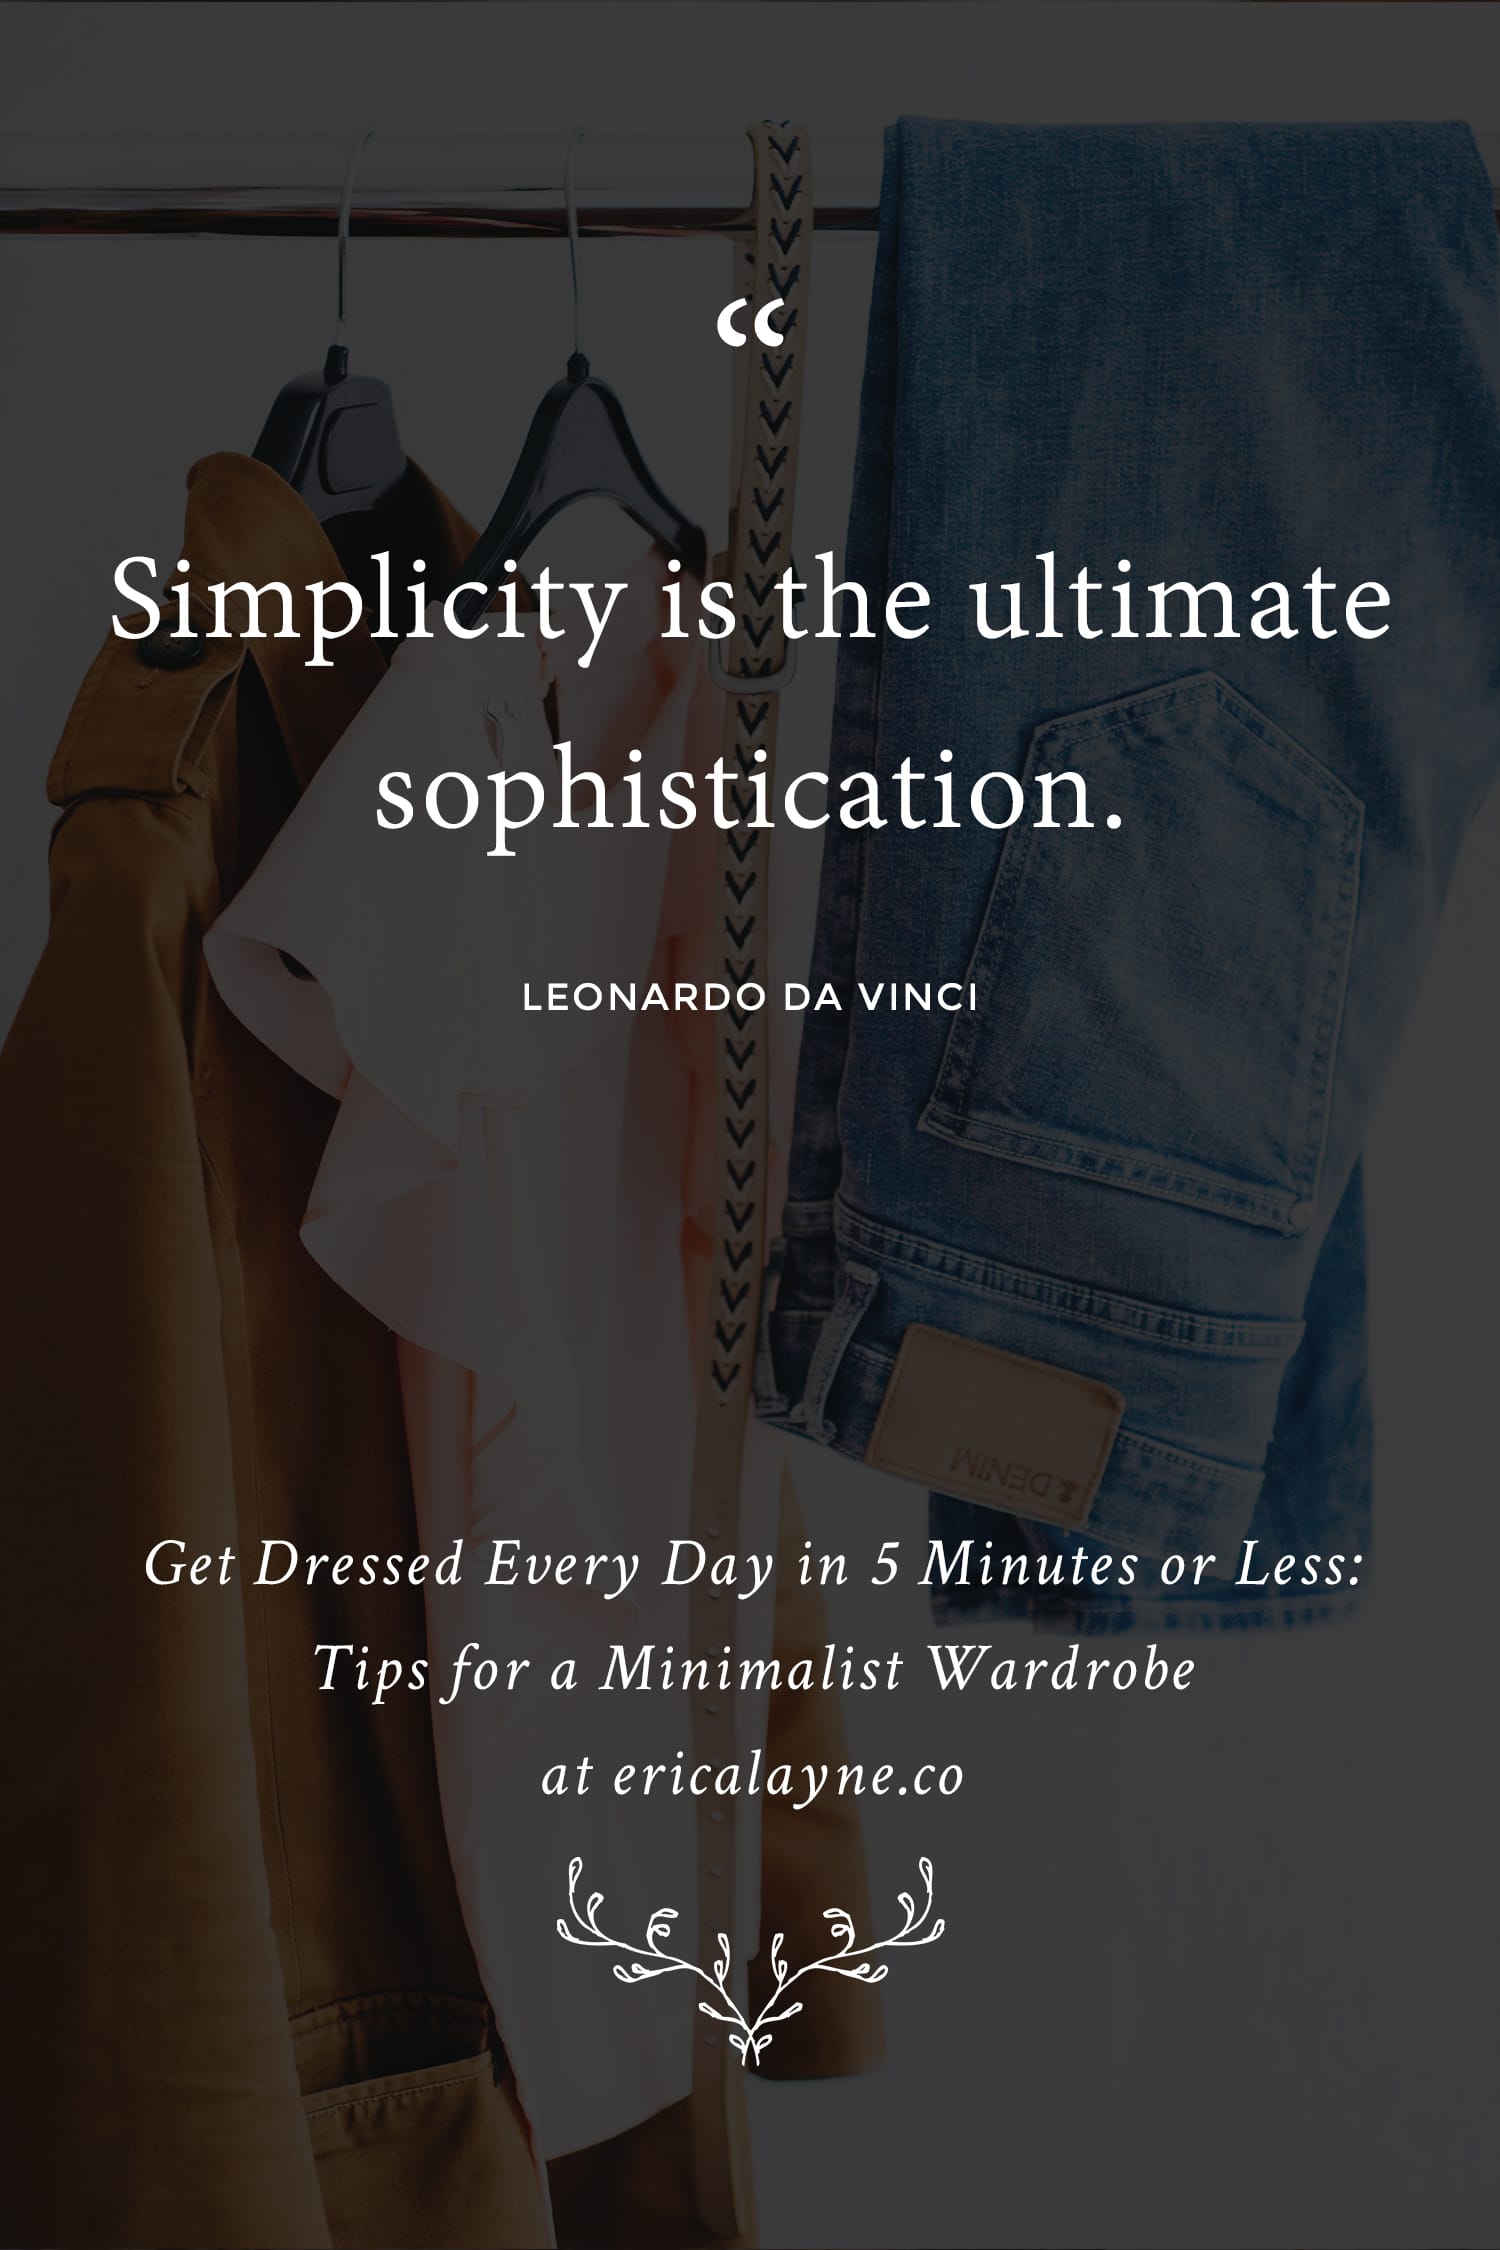 Get Dressed Every Day in 5 Minutes or Less: Tips for a Minimalist Wardrobe